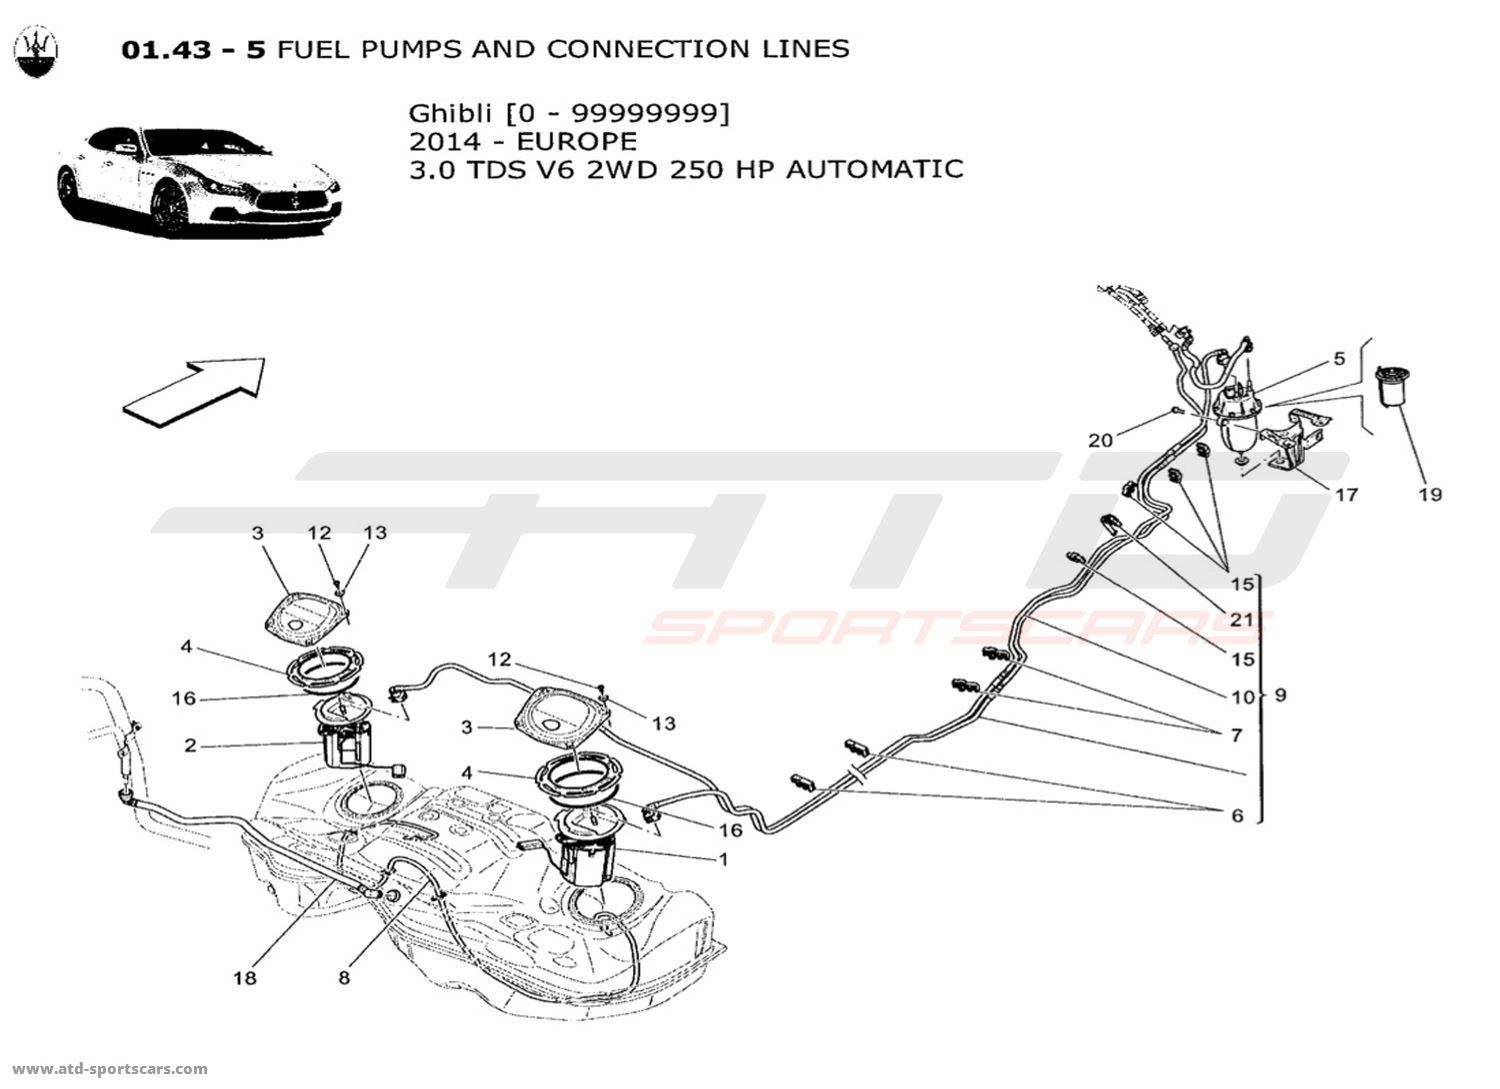 FUEL PUMPS AND CONNECTION LINES